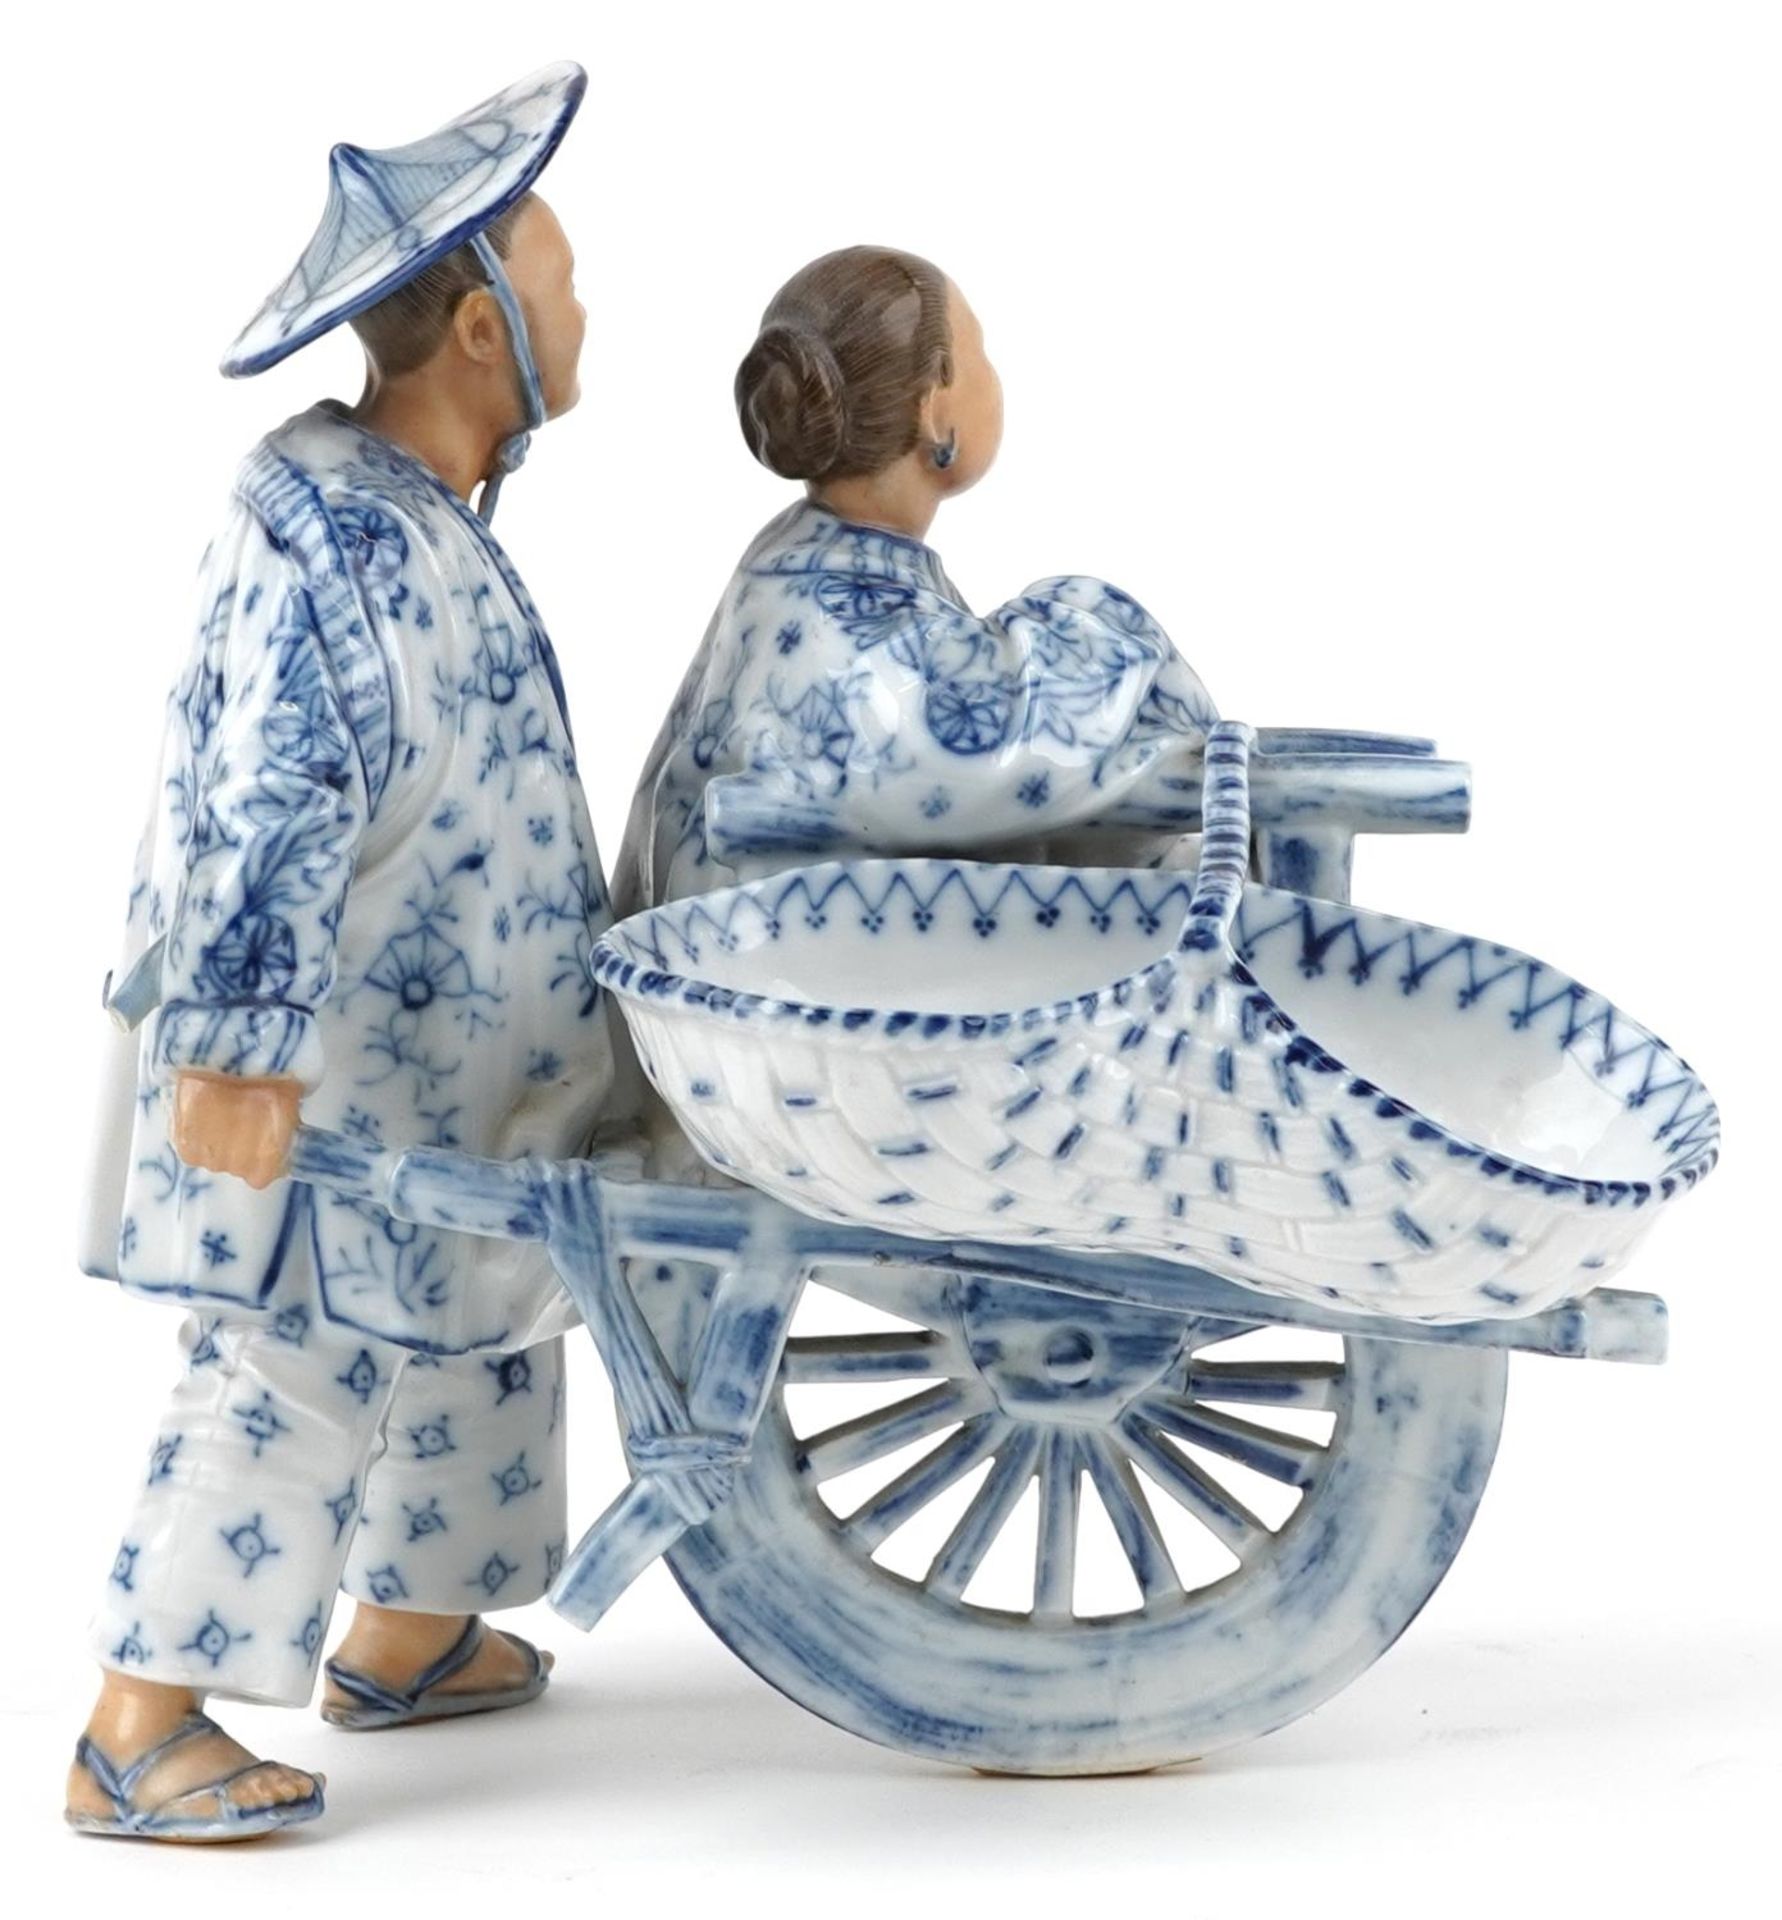 19th century European porcelain sweetmeat dish in the form of a Chinaman with rickshaw - Image 5 of 7